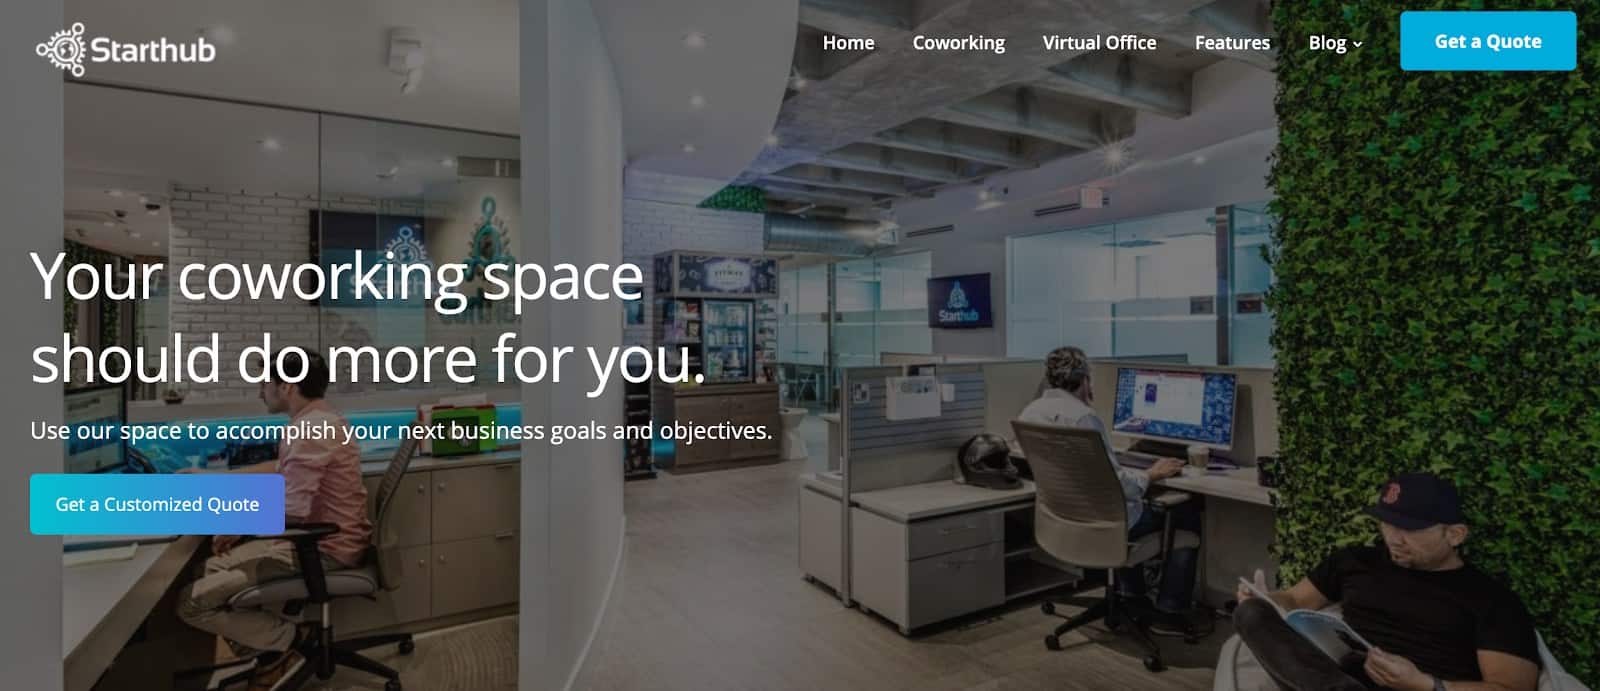 Starthub website hero banner | Your coworking space shold do more for you